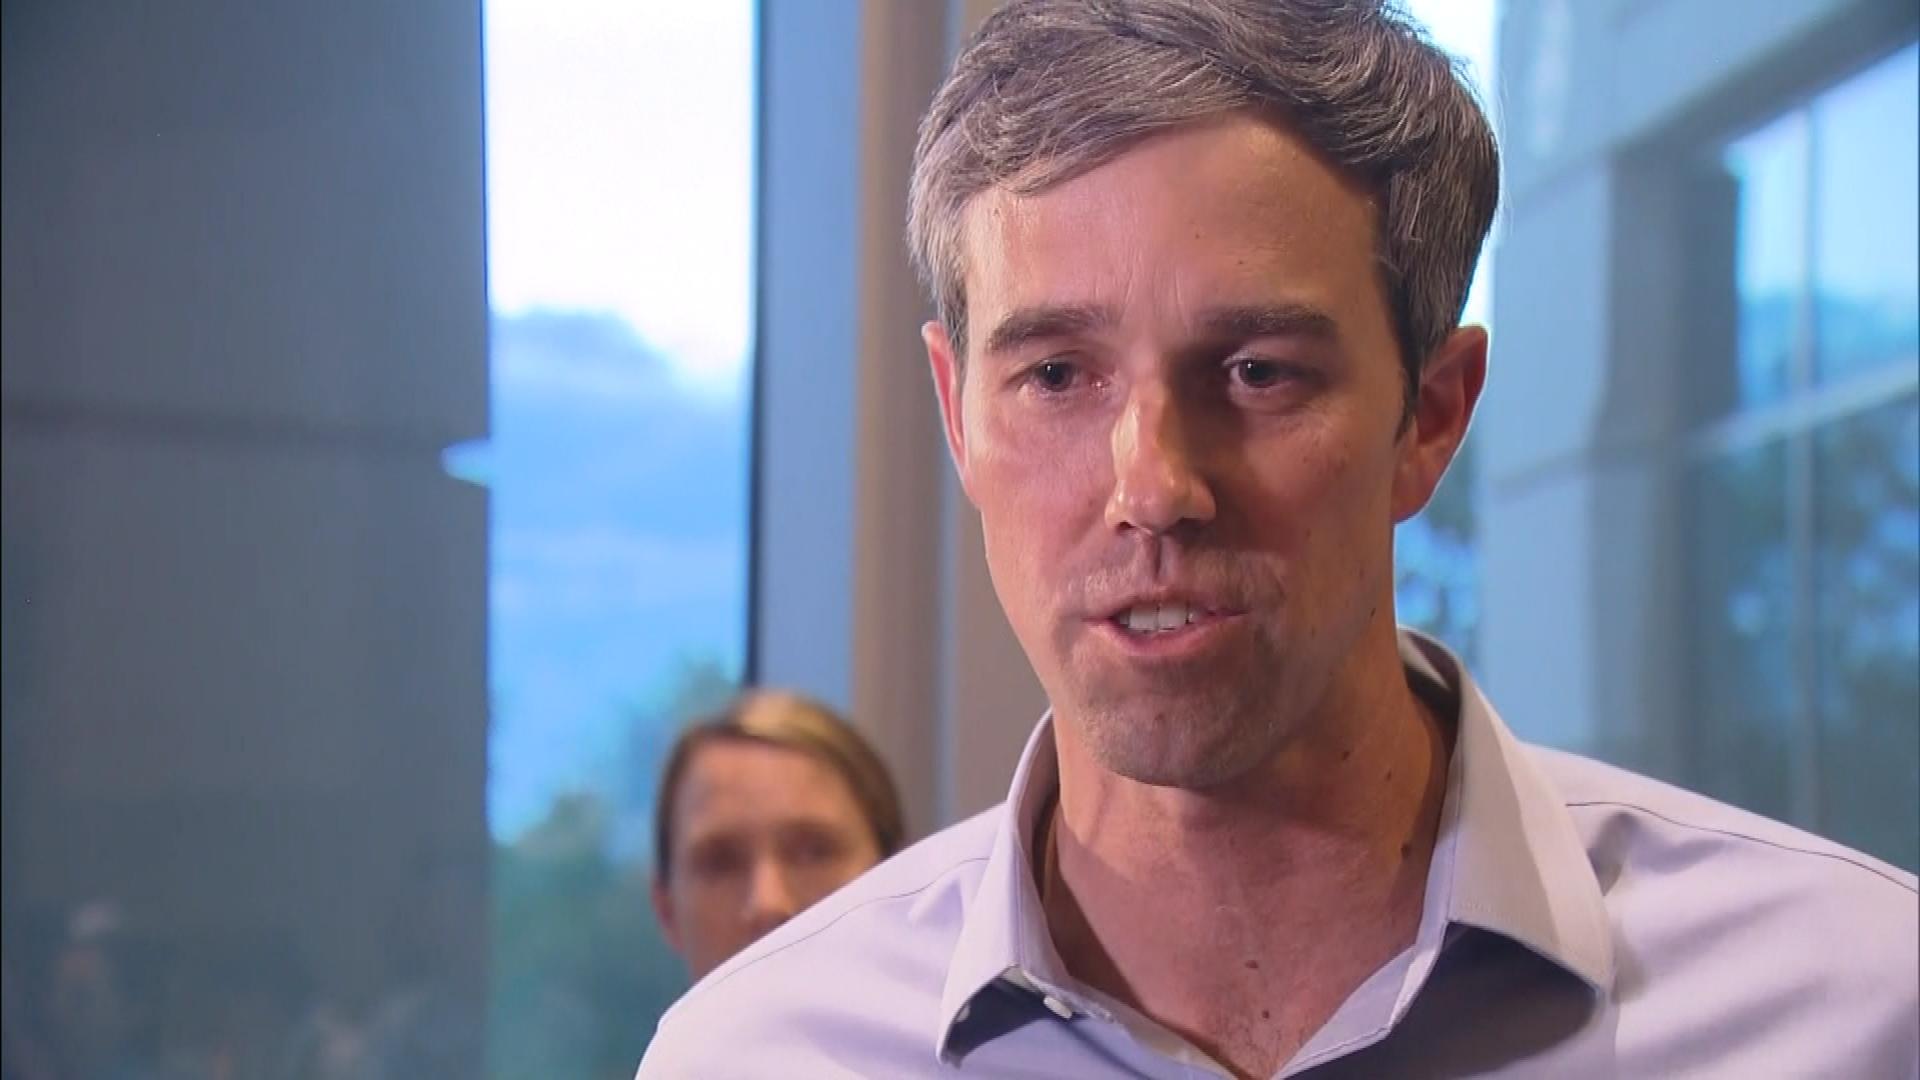 Democratic presidential candidate Beto O'Rourke during an appearance in Aurora, Colorado.